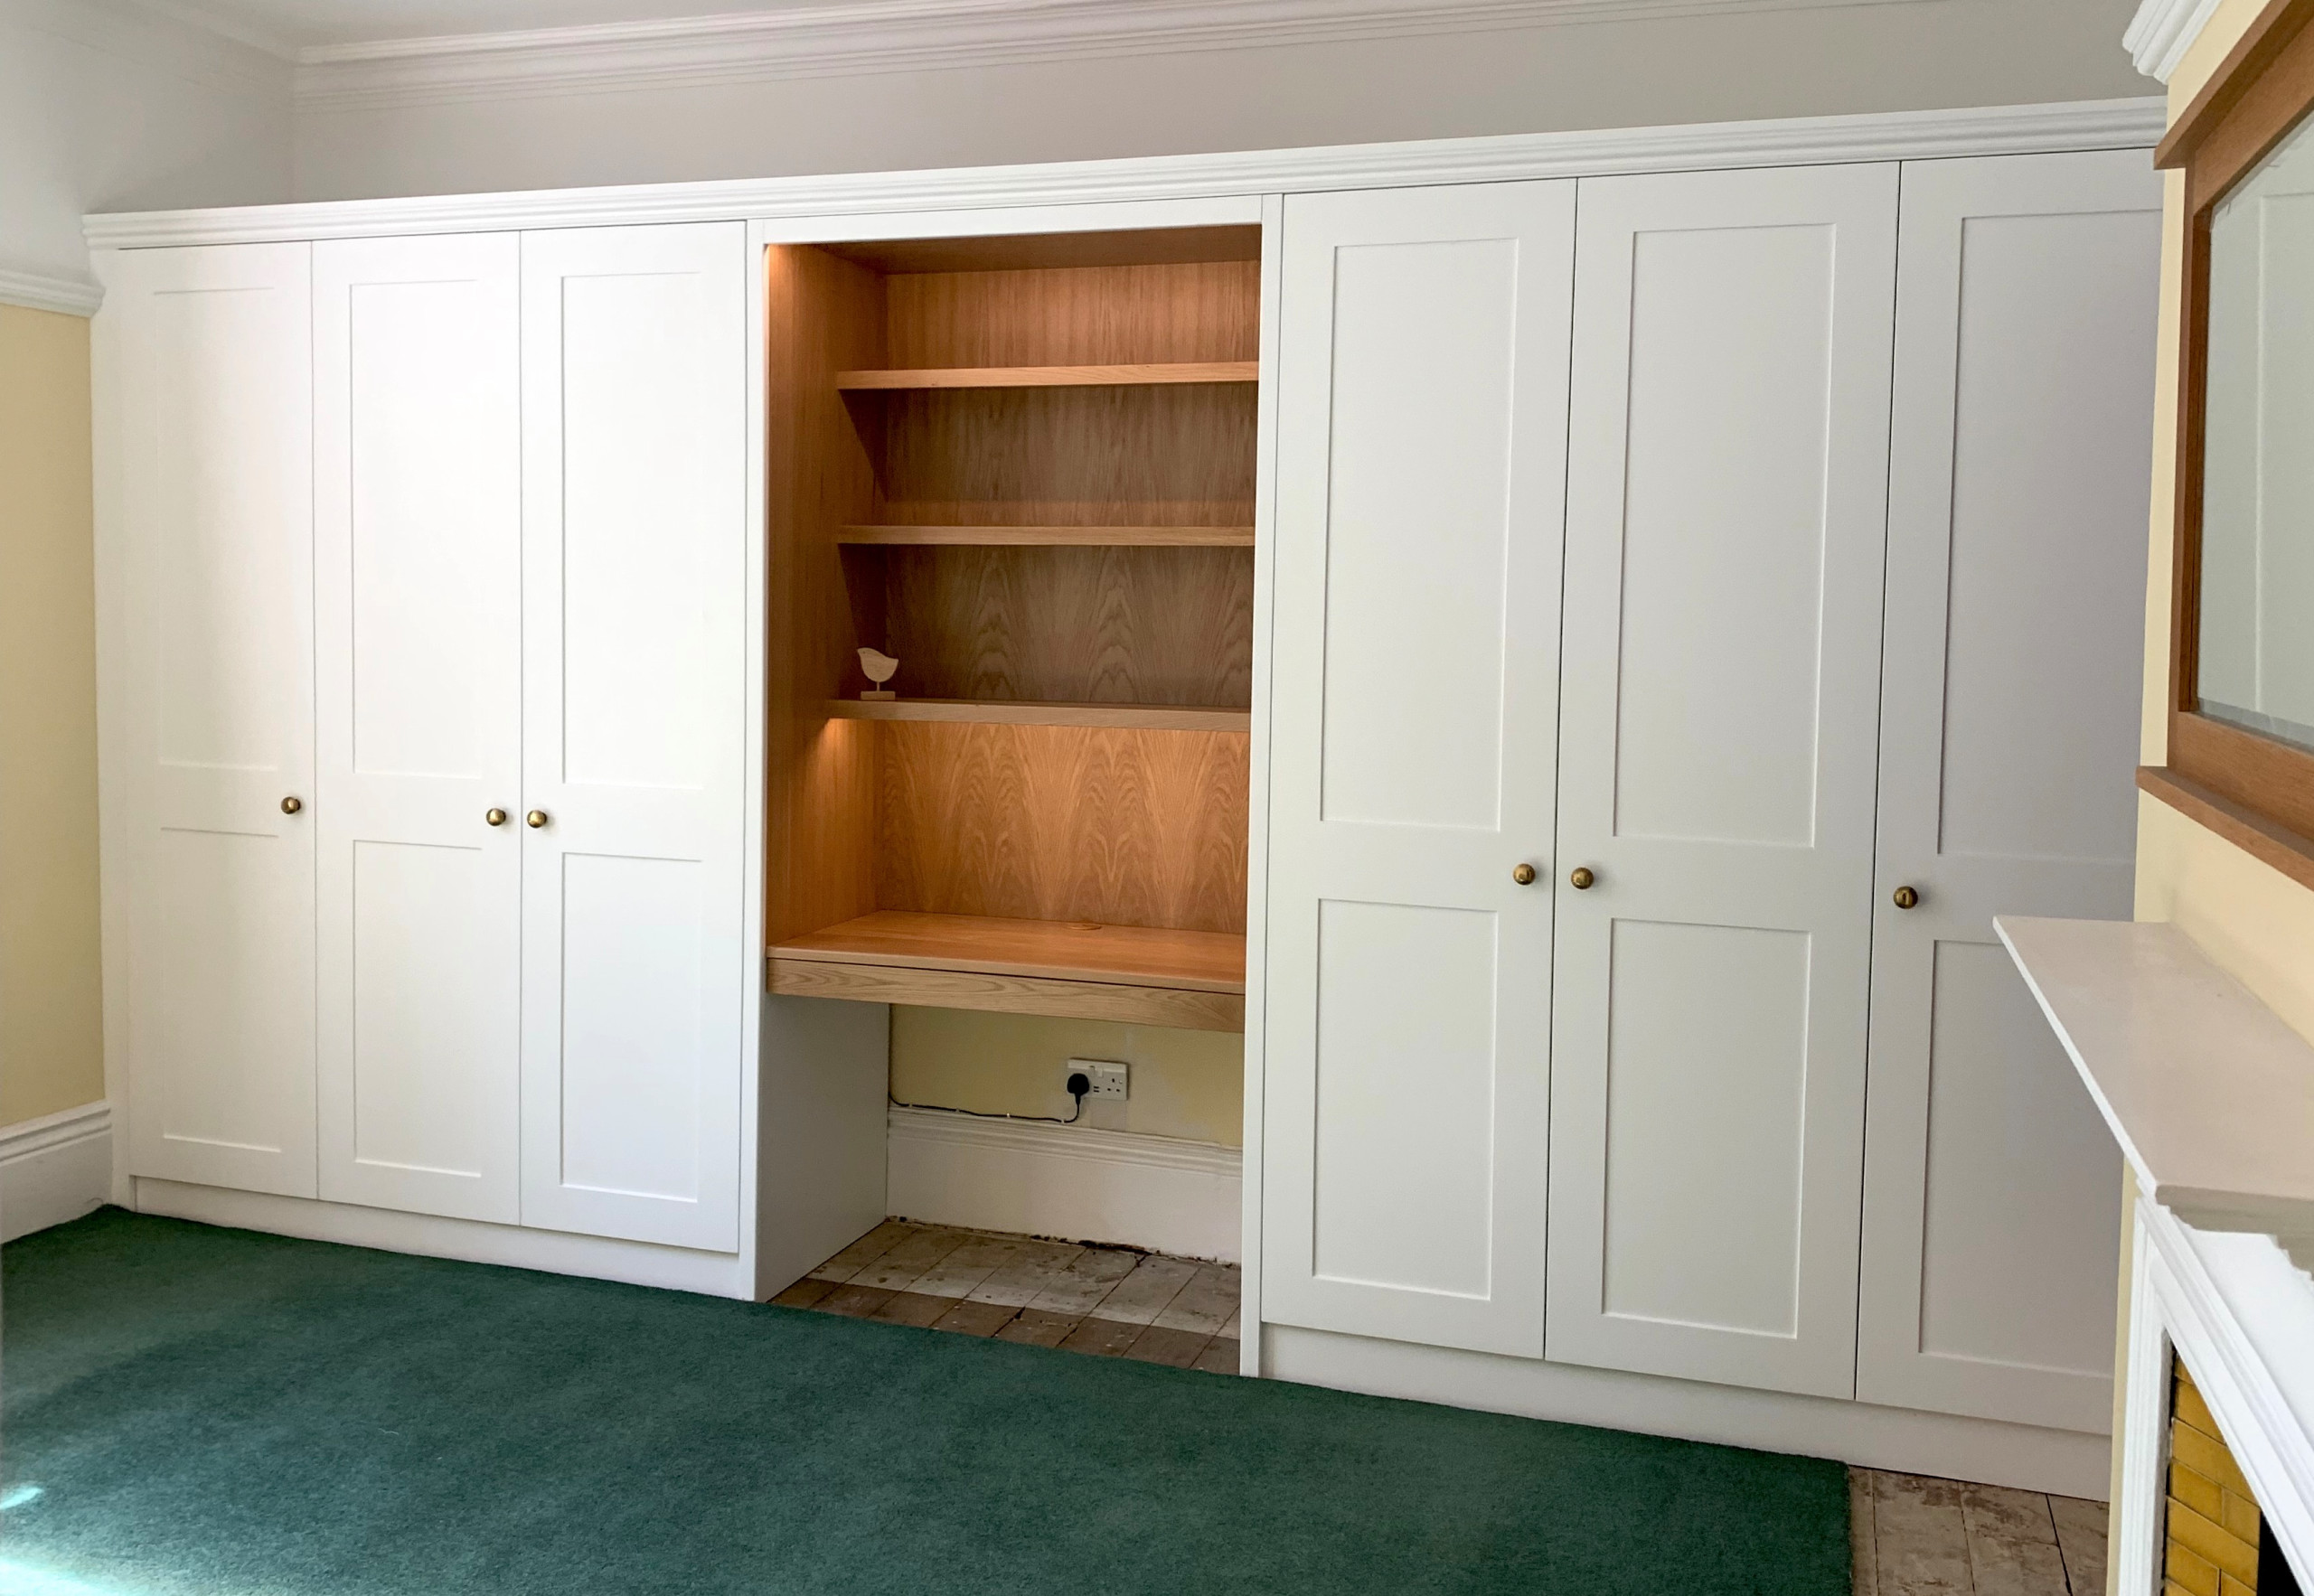 Wardrobes with white spray painted shaker doors and oak desk area